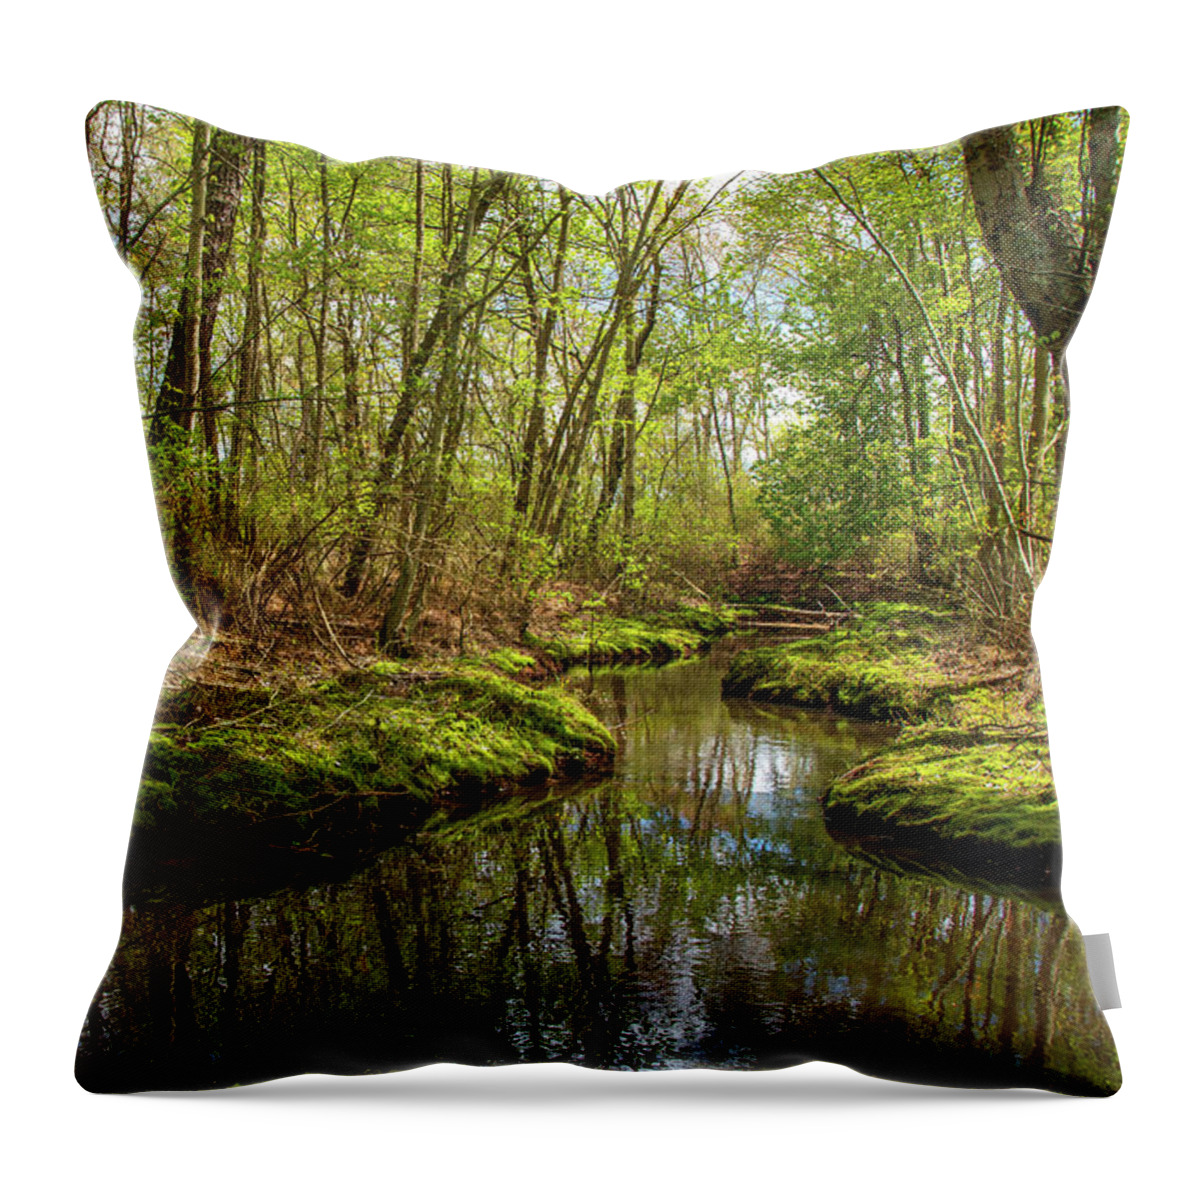 New Jersey Throw Pillow featuring the photograph Peaceful Pinelands Stream by Kristia Adams